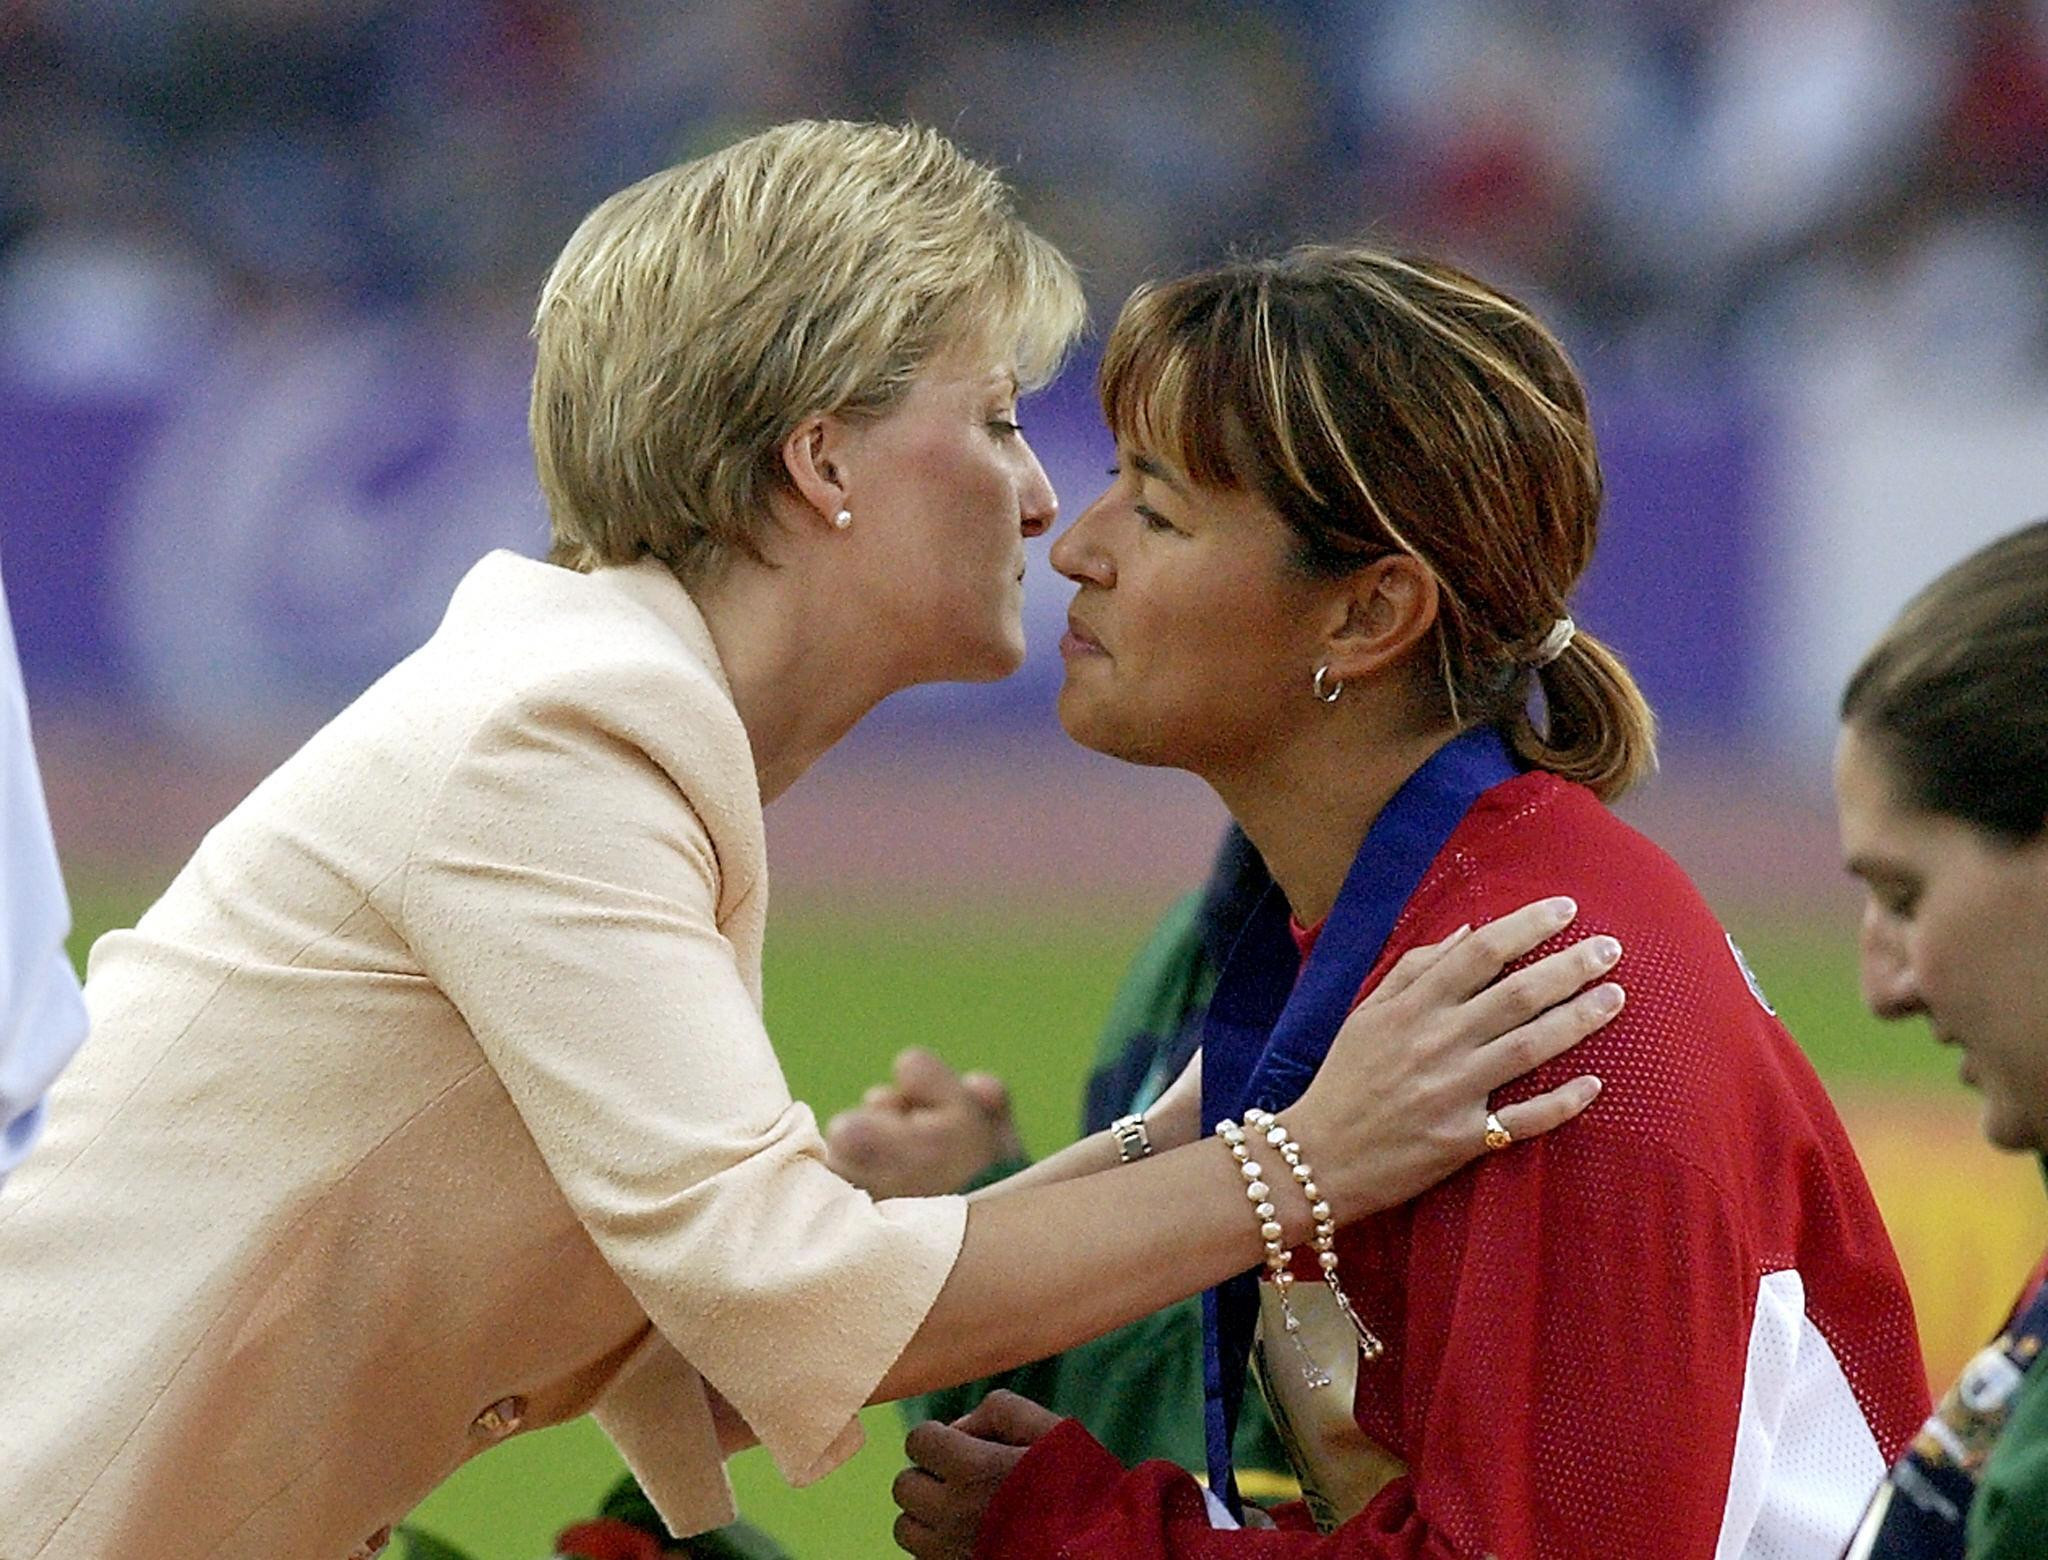 Chantal Petitclerc receives her 2002 Commonwealth Games gold medal from the  Countess of Wessex after winning the 800m - the first time an event for an athlete with a disability had been part of the officiall programme ©Getty Images